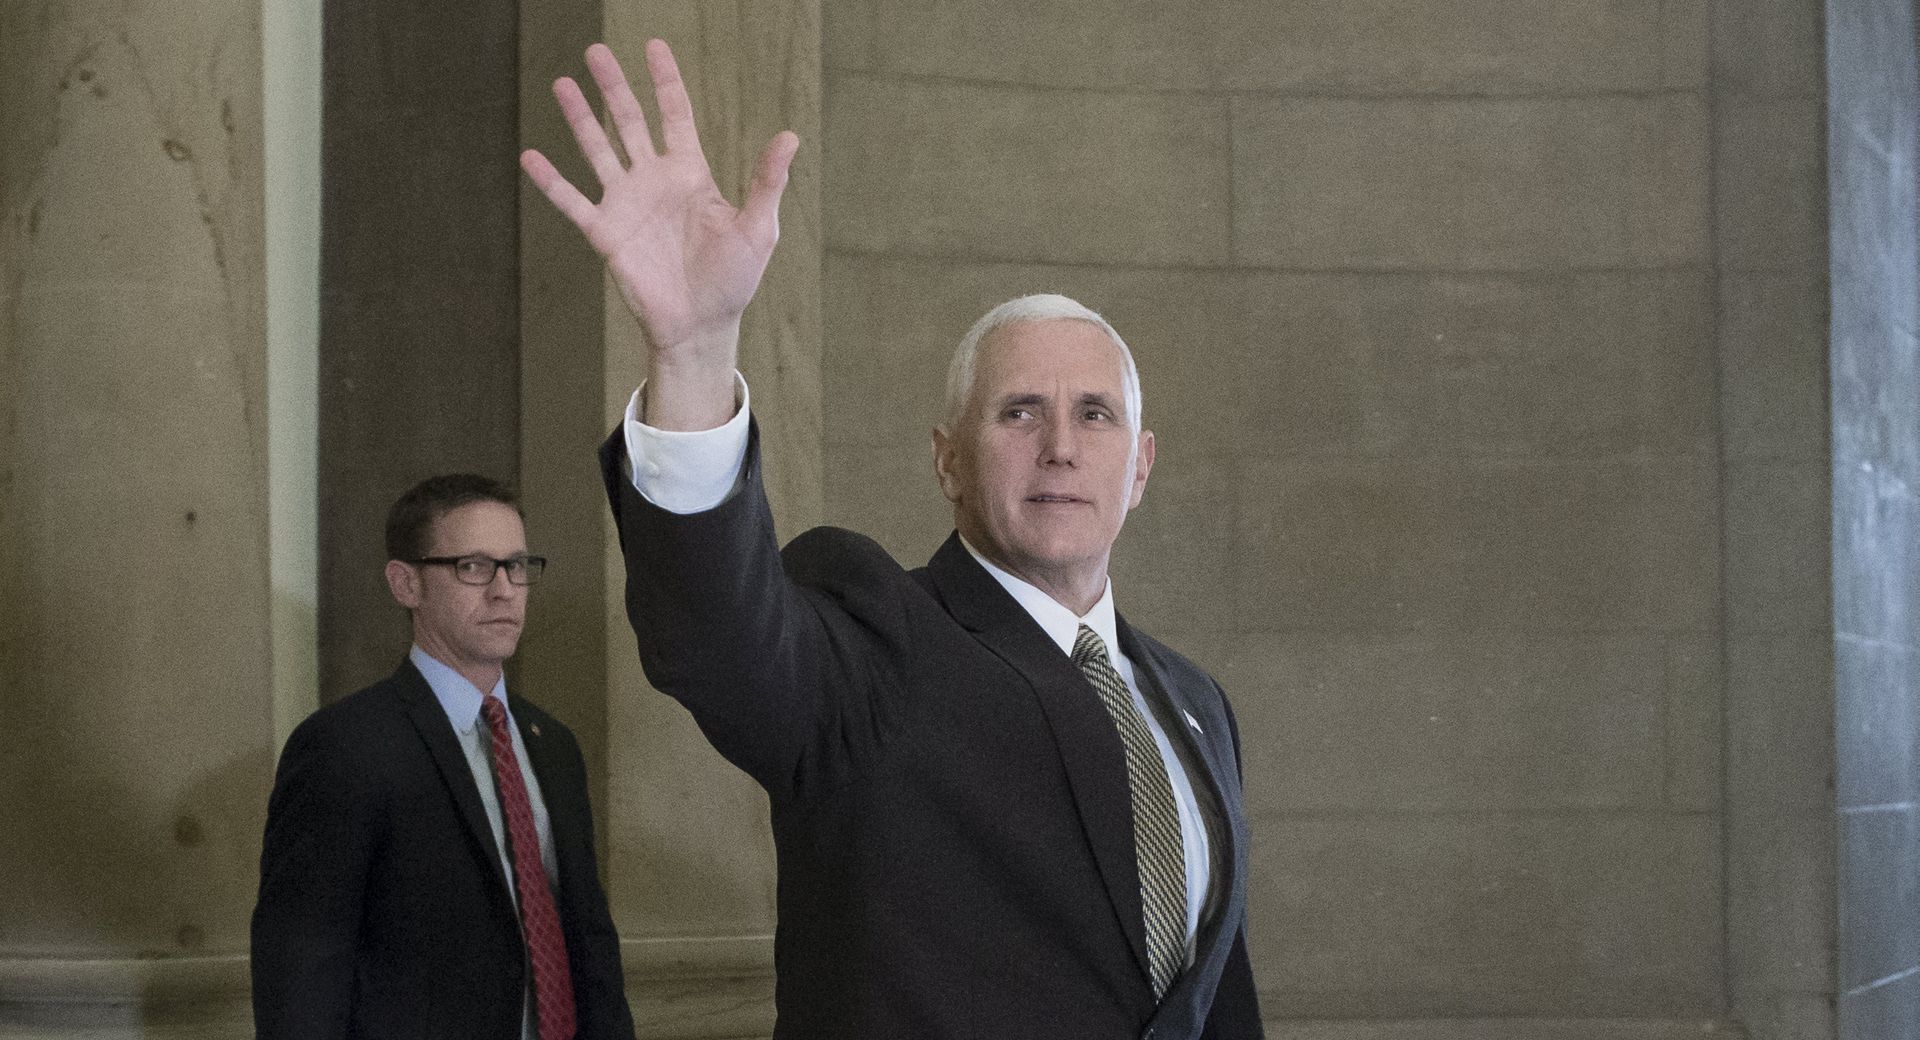 epa05778713 US Vice President Mike Pence (R) waves as he leaves the office of the Speaker of the House Republican Paul Ryan (not pictured), on Capitol Hill in Washington, DC, USA, 08 February 2017.  Pence attended a series of meetings on Capitol Hill.  EPA/MICHAEL REYNOLDS